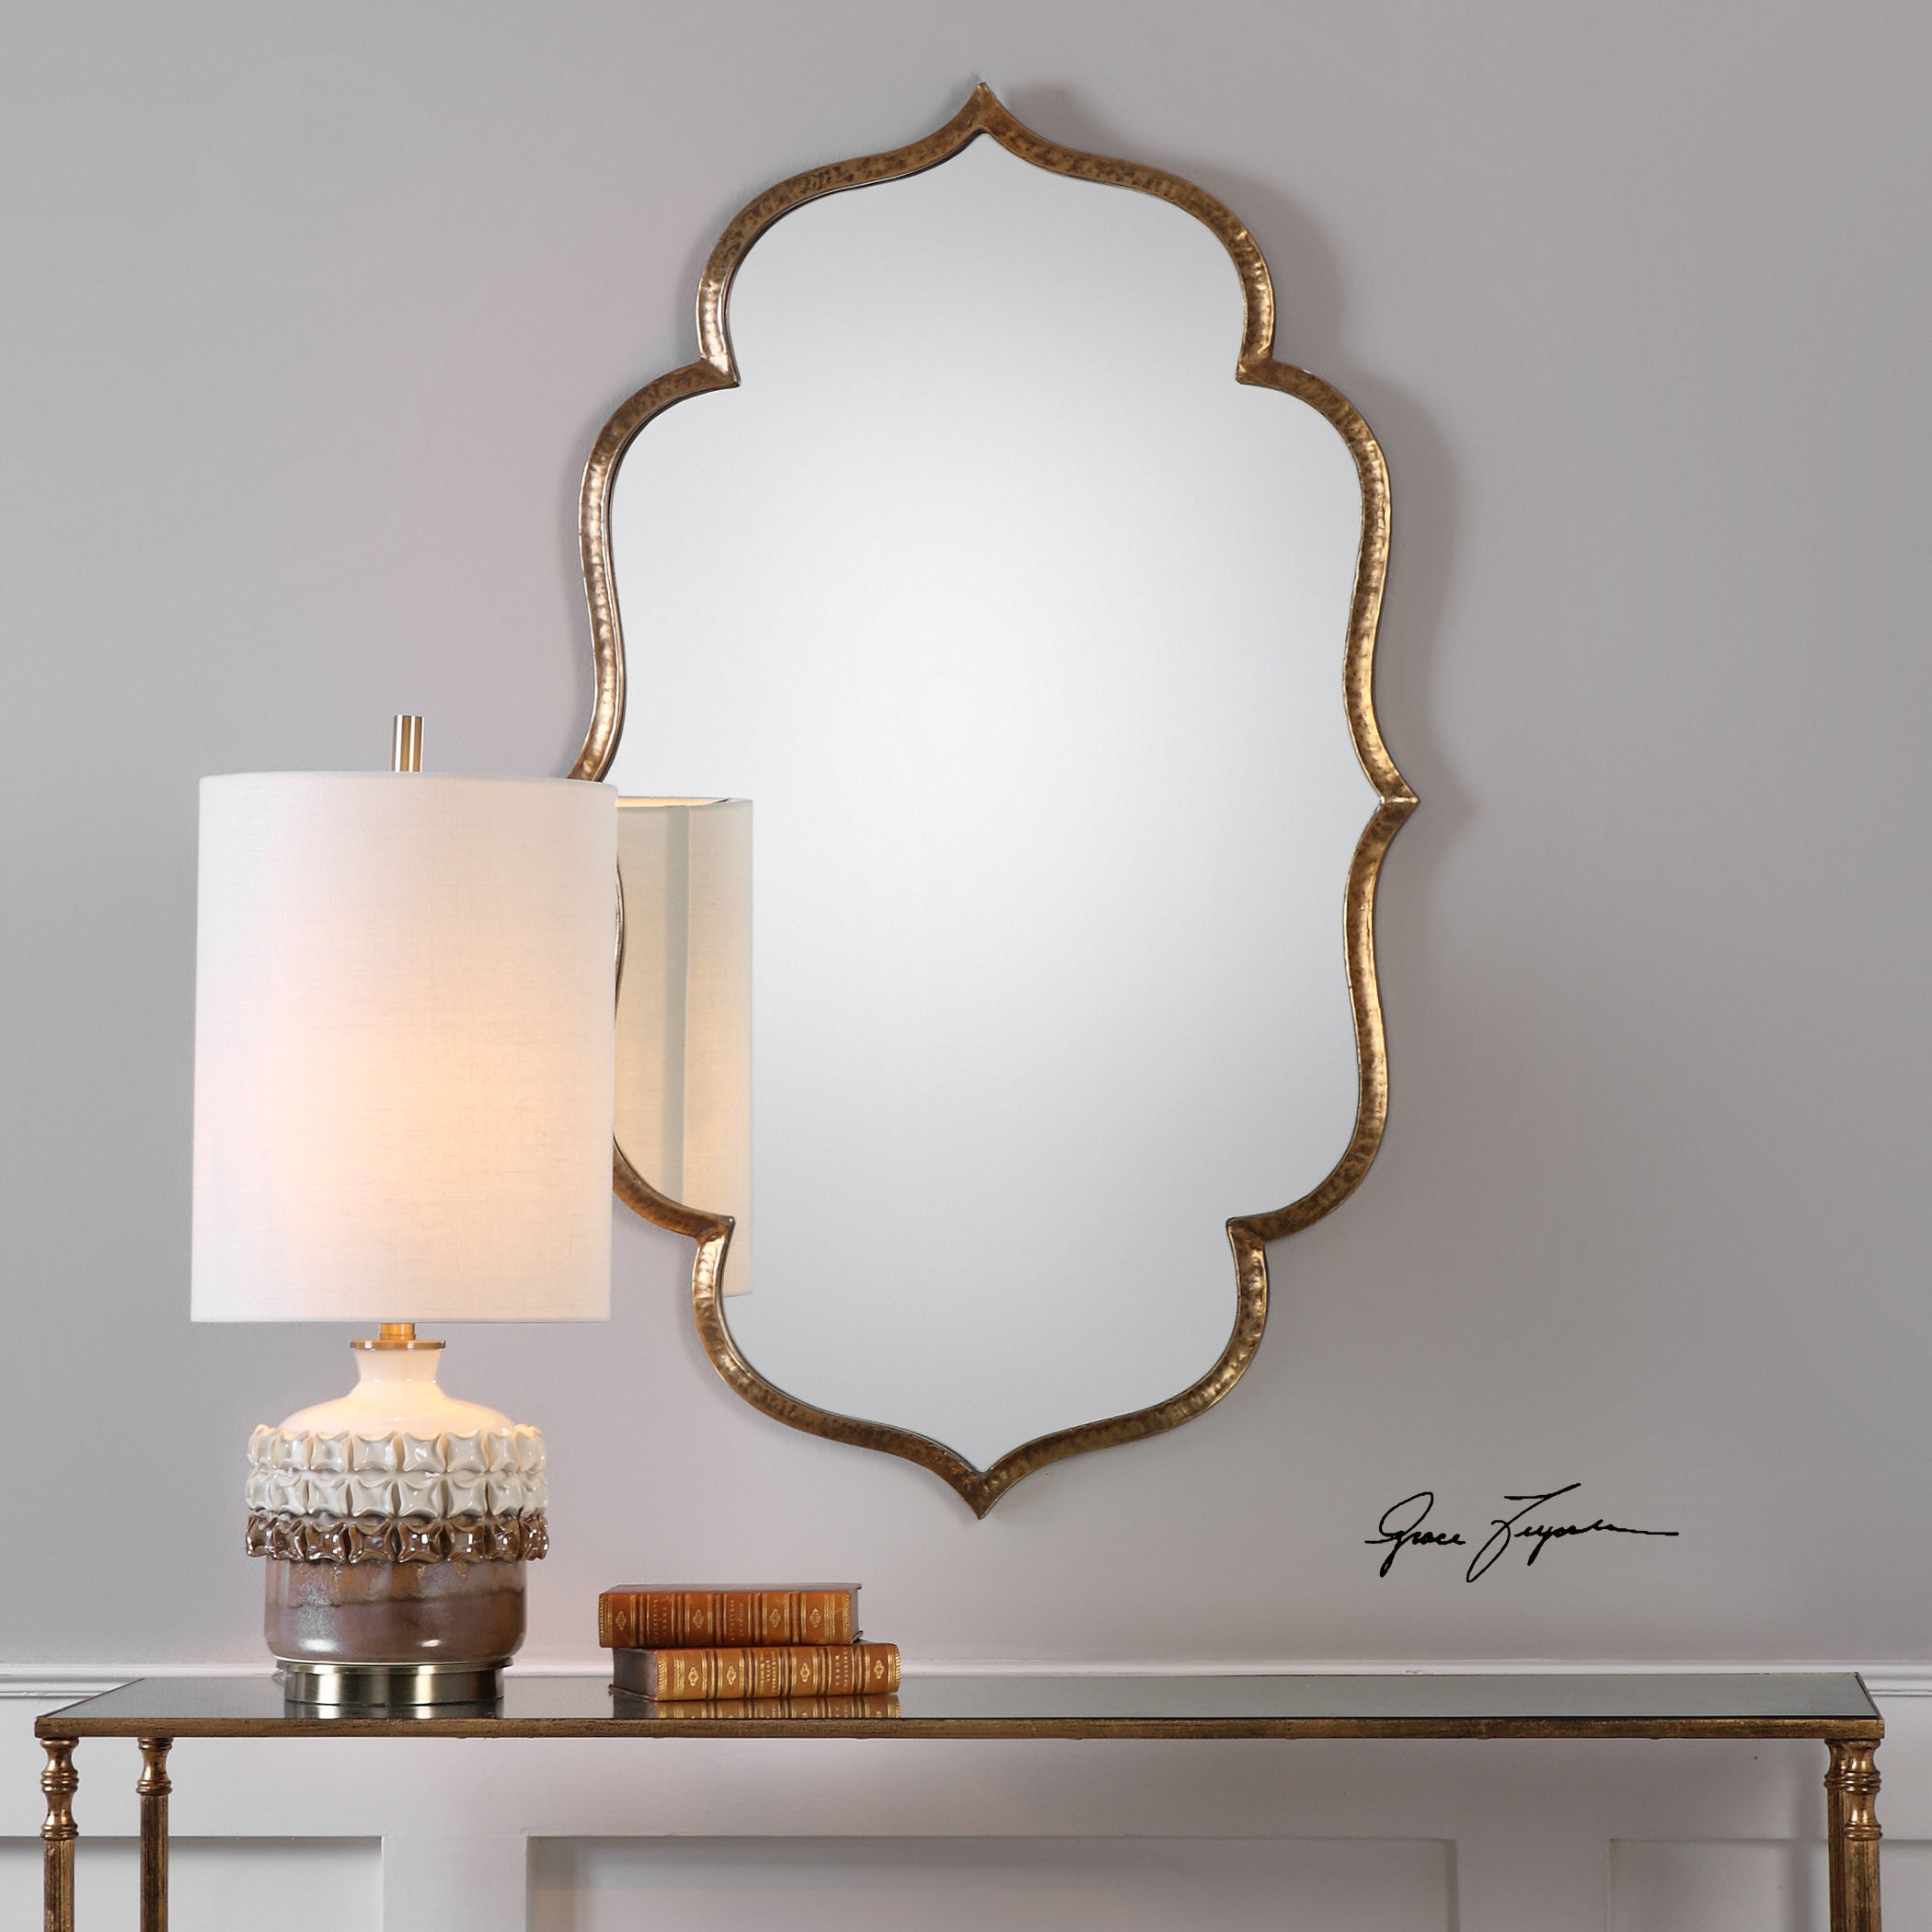 Uttermost Mirrors Misa Gold Square Mirrors S/2 09268 - Kendall